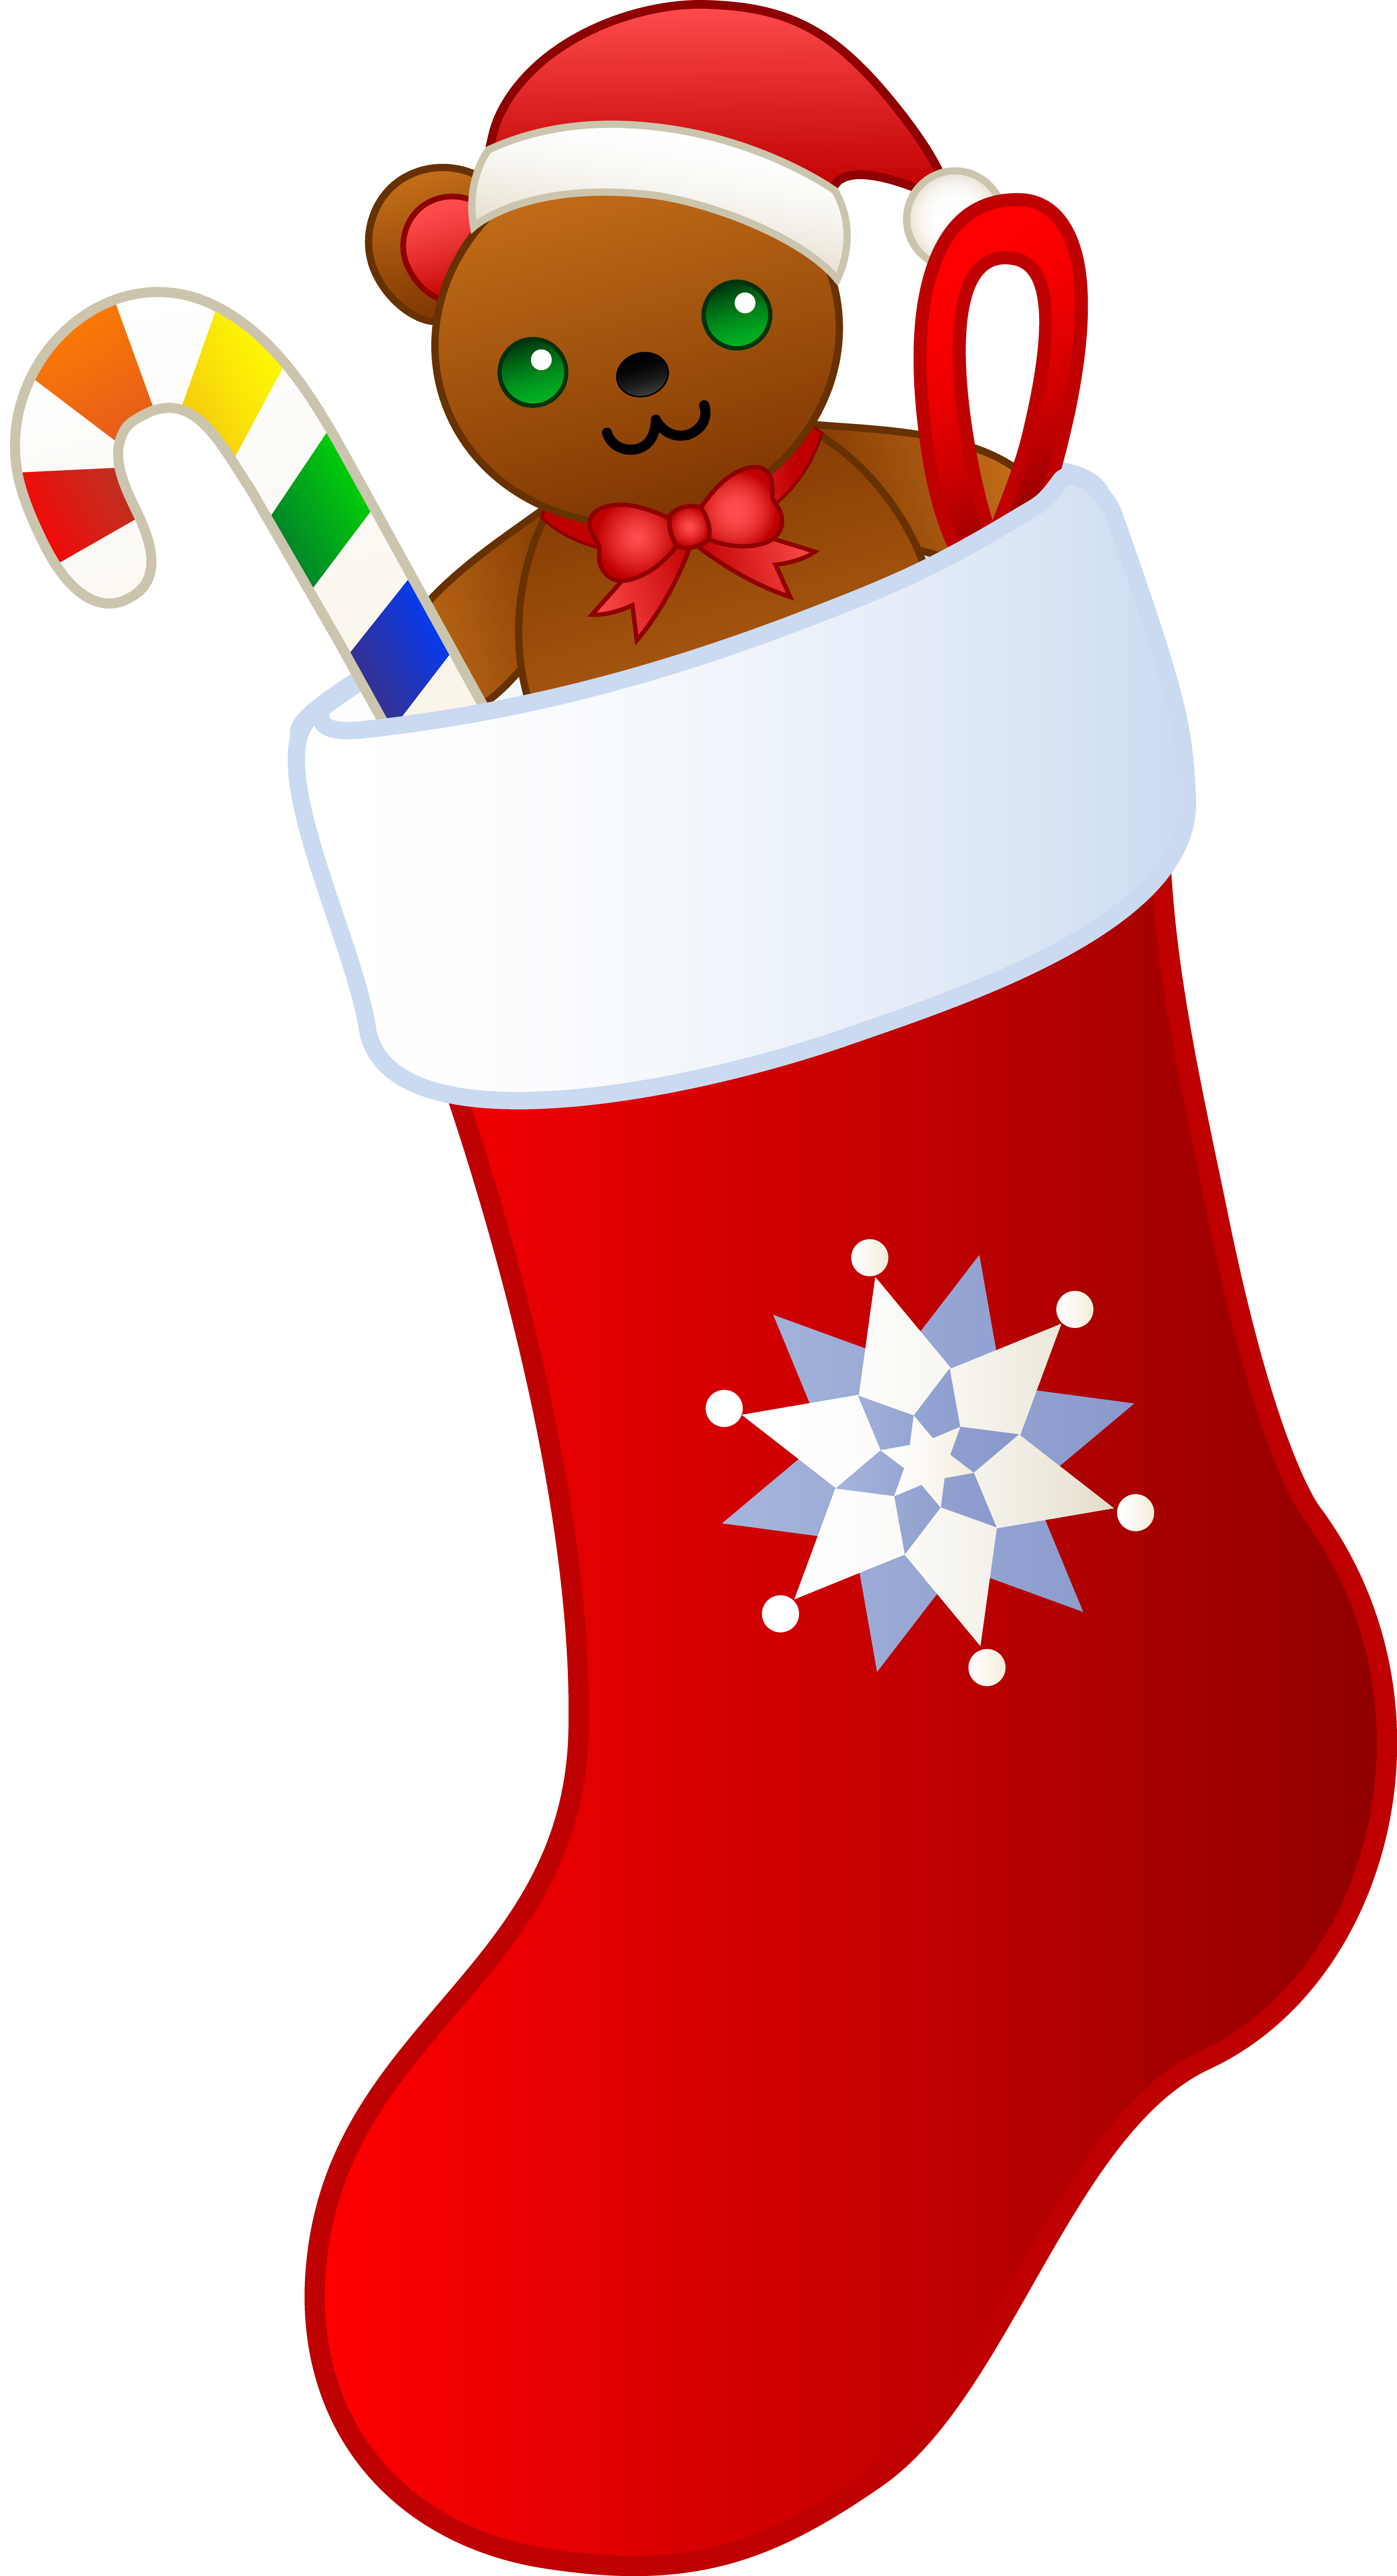 Free Picture Of Christmas Stocking, Download Free Clip Art.